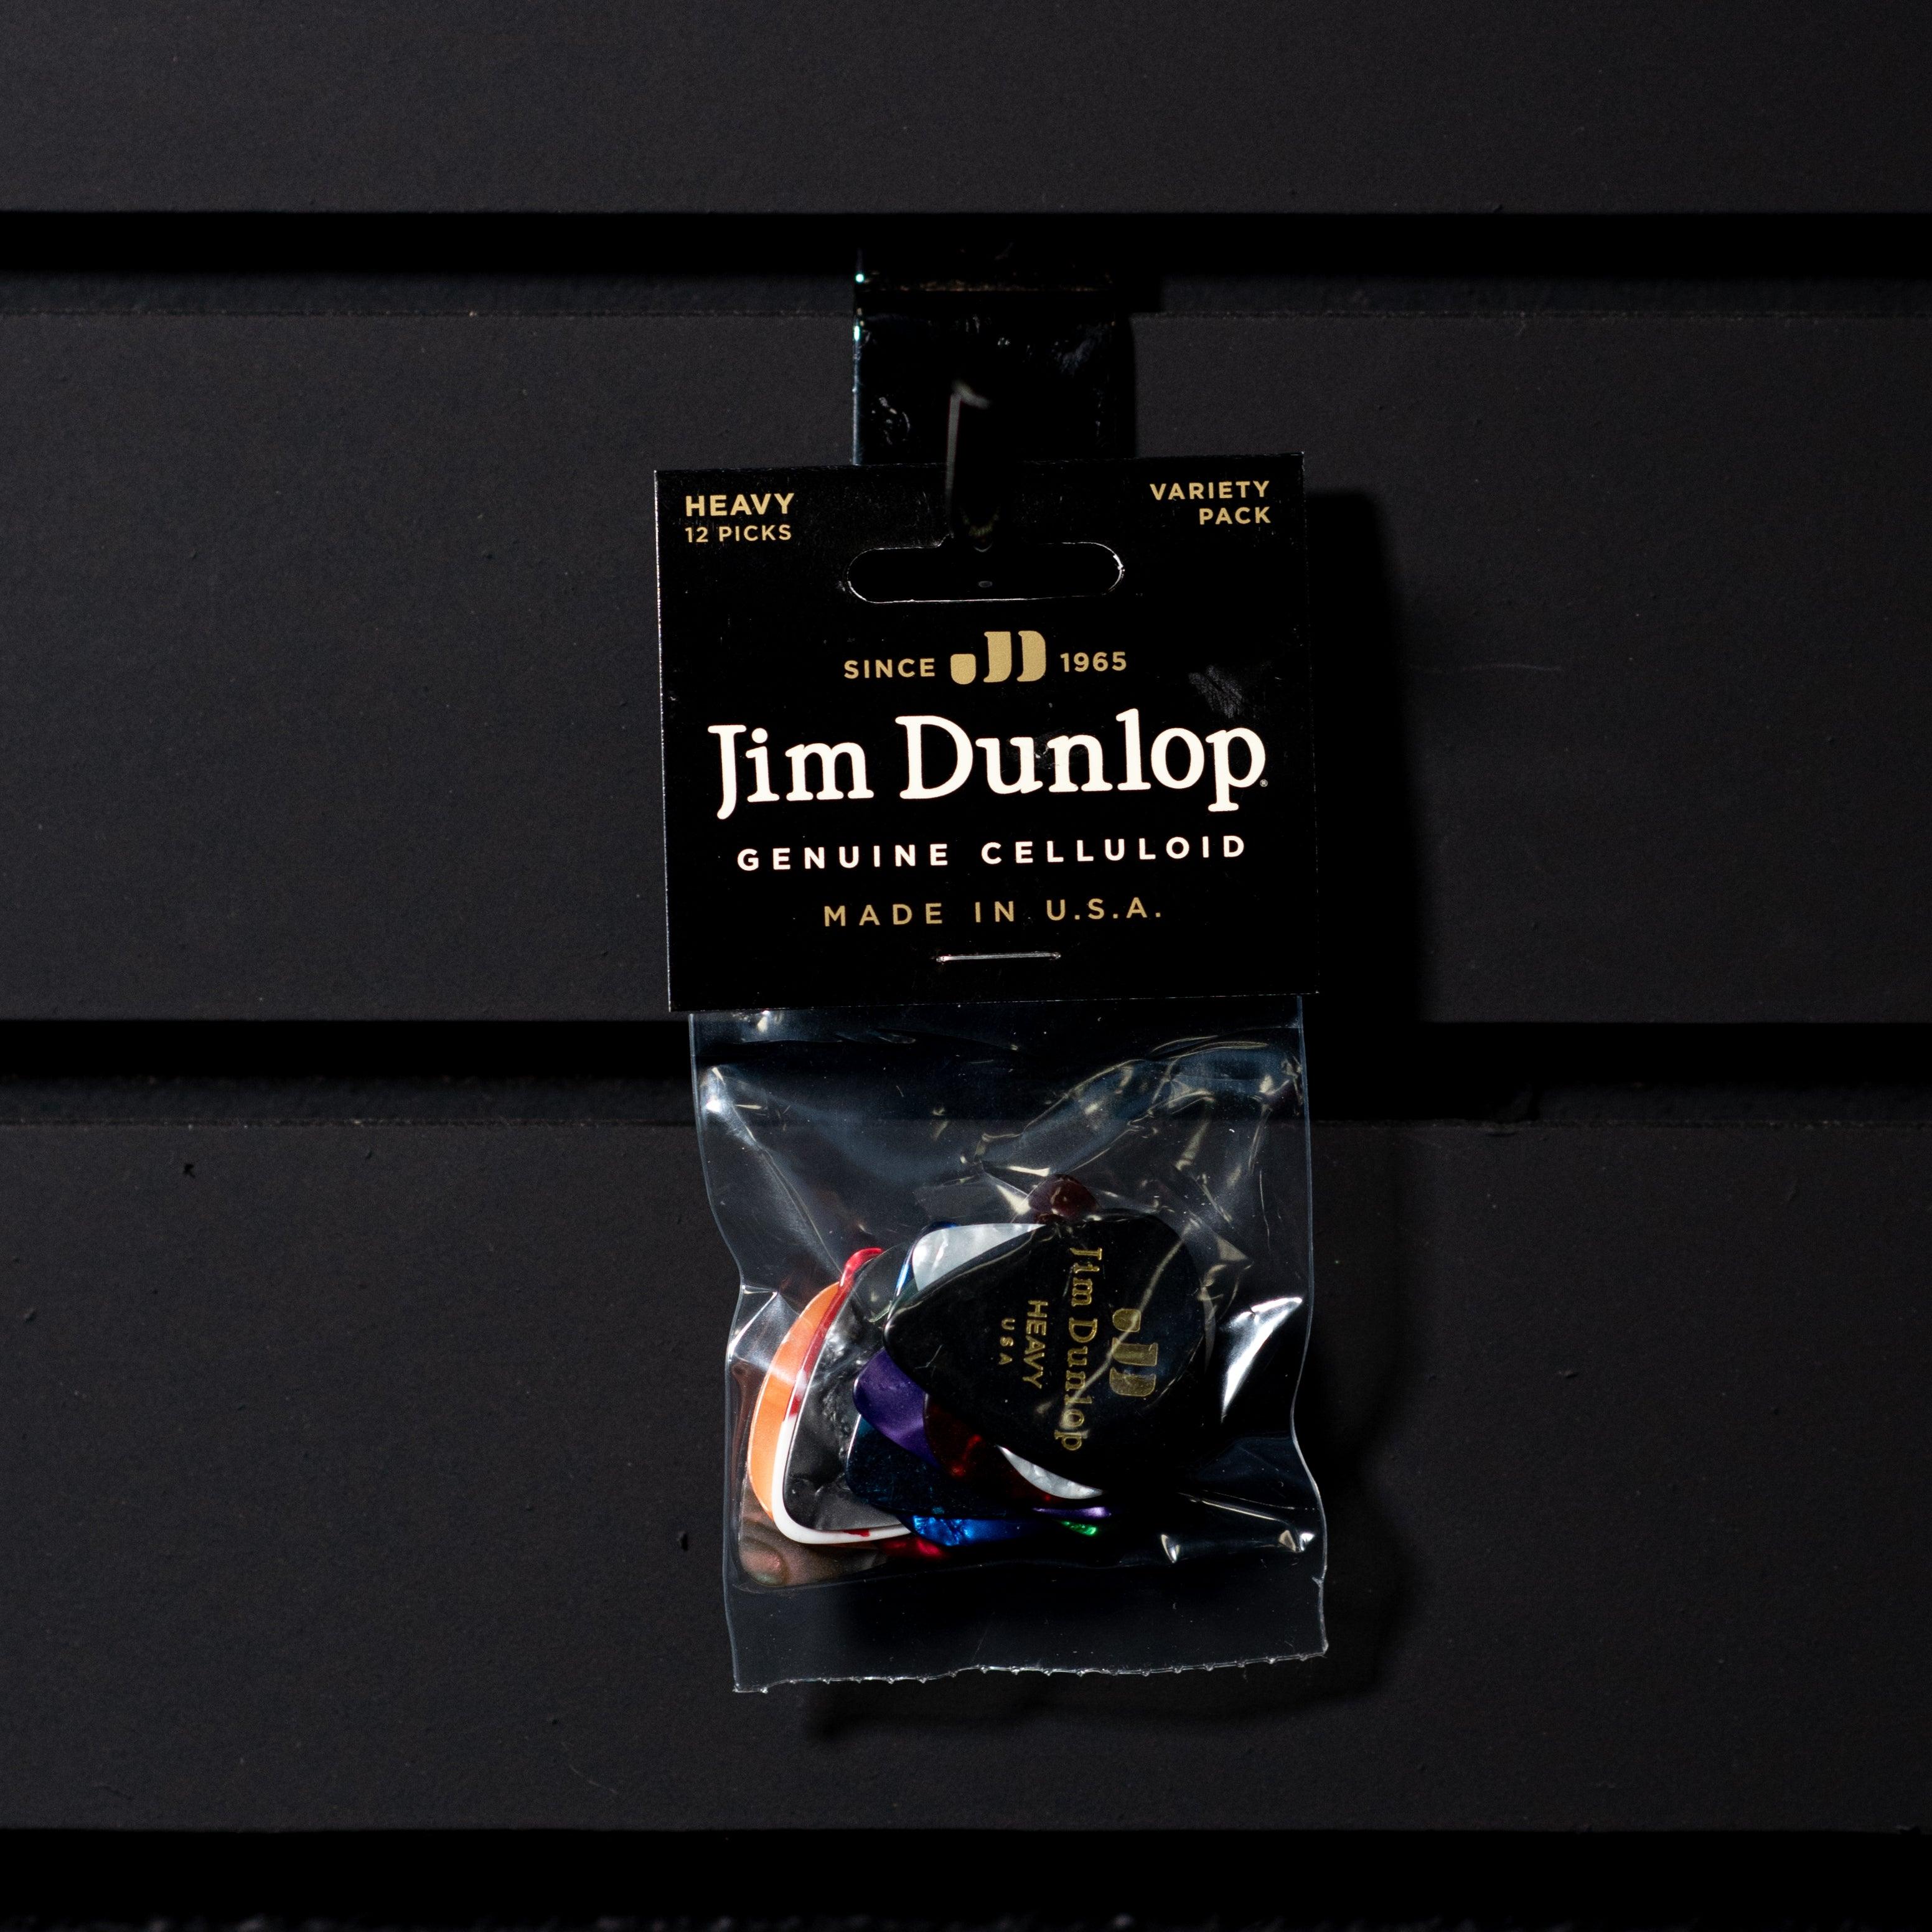 Dunlop Celluloid Heavy Variety Pack - Impulse Music Co.